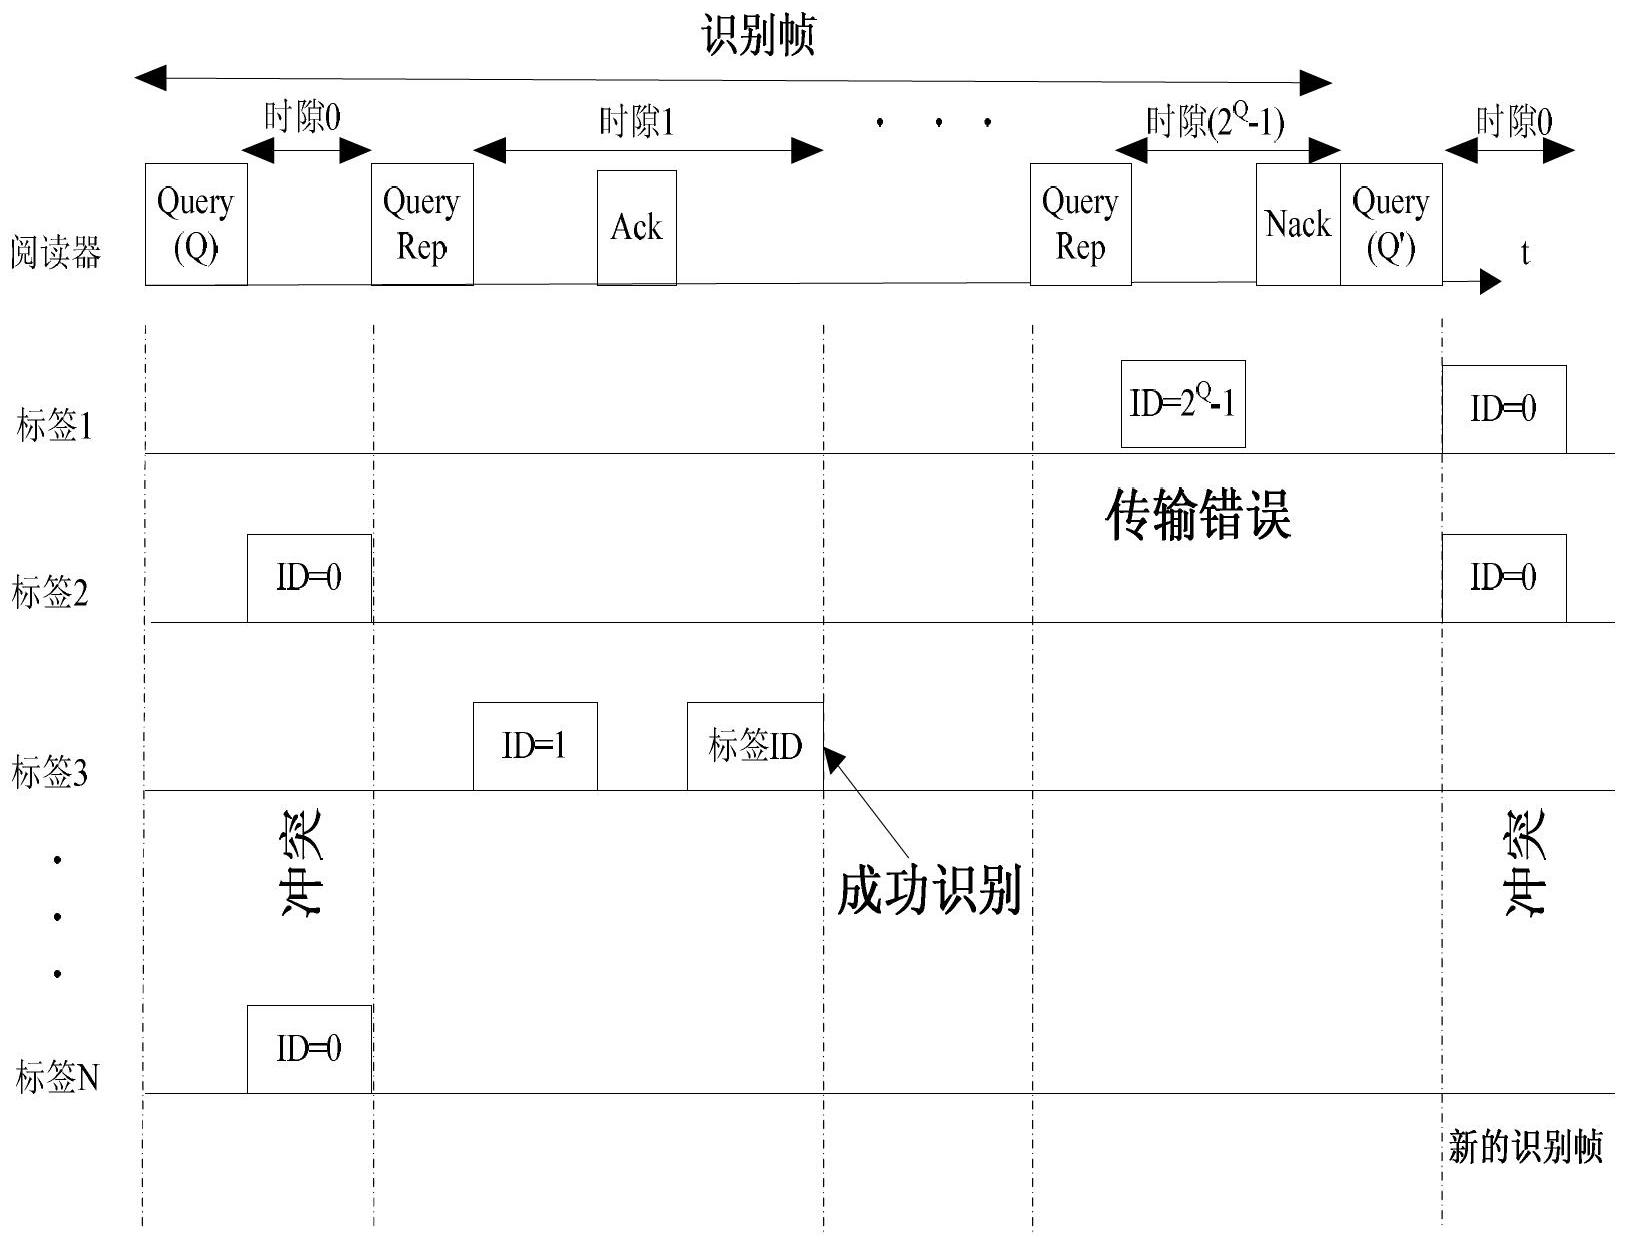 Method for improving electron label reading efficiency based on power control